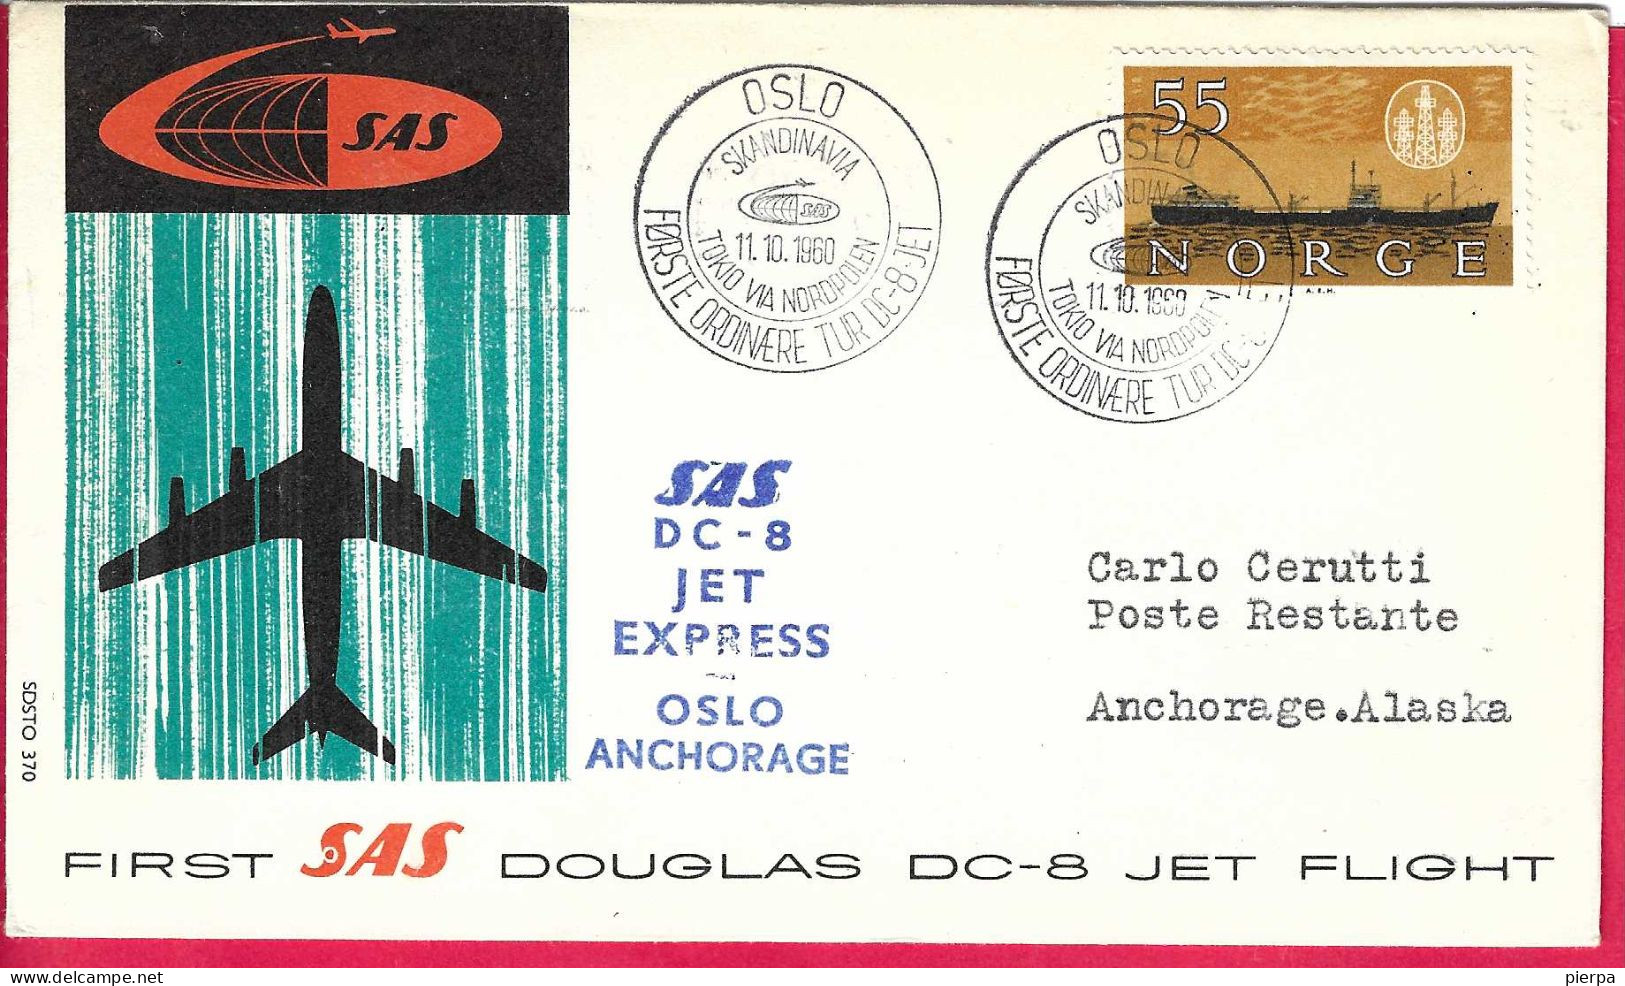 NORGE - FIRST DOUGLAS DC-8 FLIGHT - SAS - FROM OSLO TO ANCHORAGE *11.10.60* ON OFFICIAL COVER - Covers & Documents